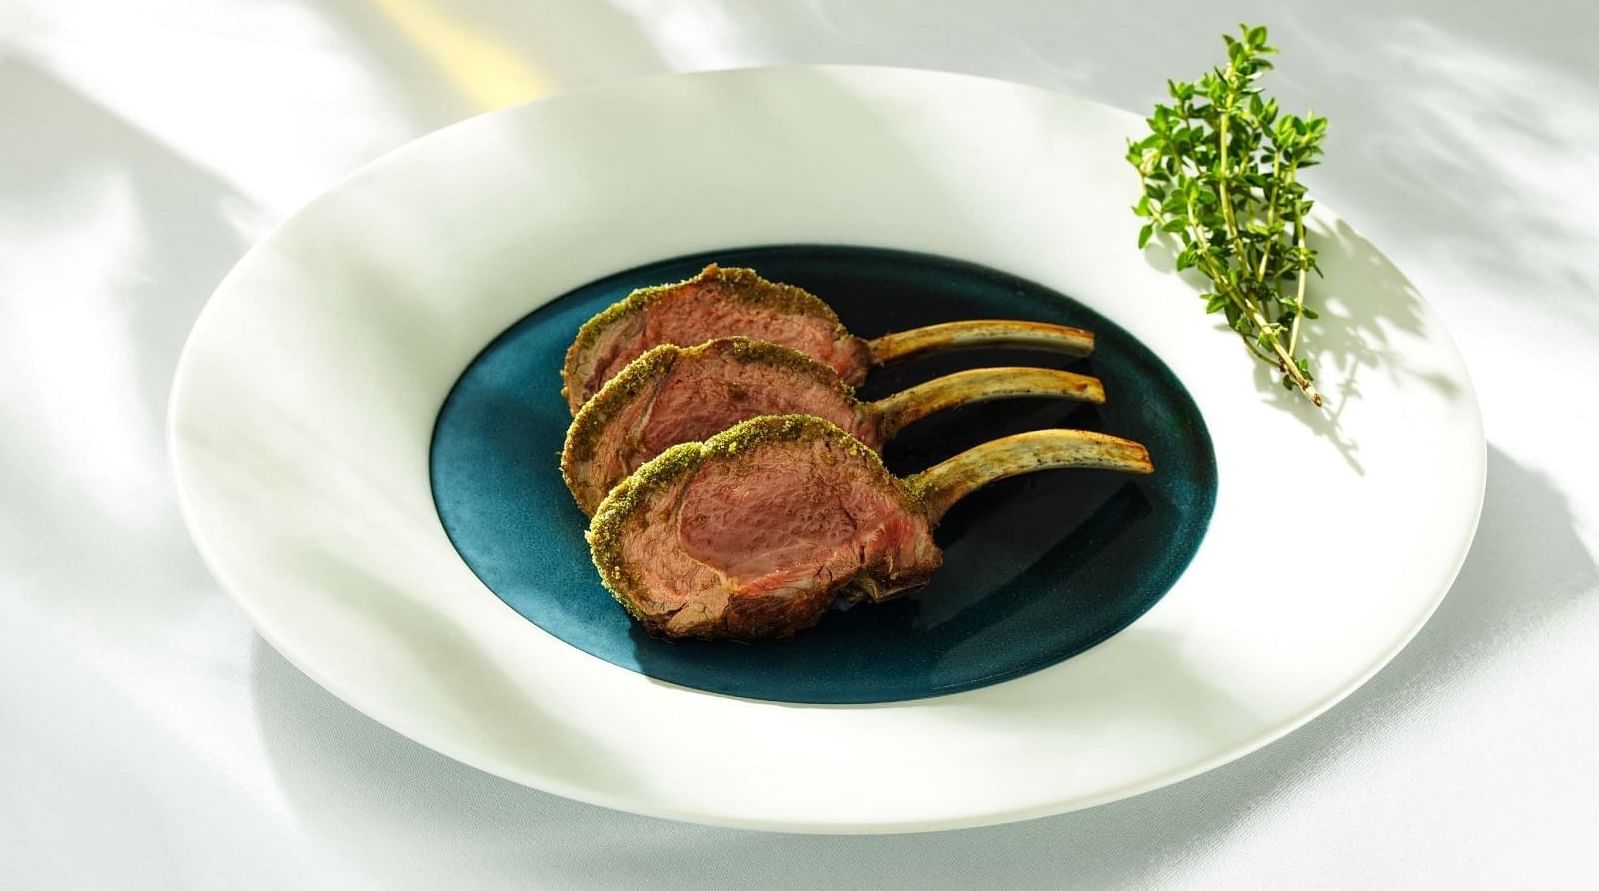 Lamb rack dish with green herbs served in Whitcomb's restaurant at The Londoner